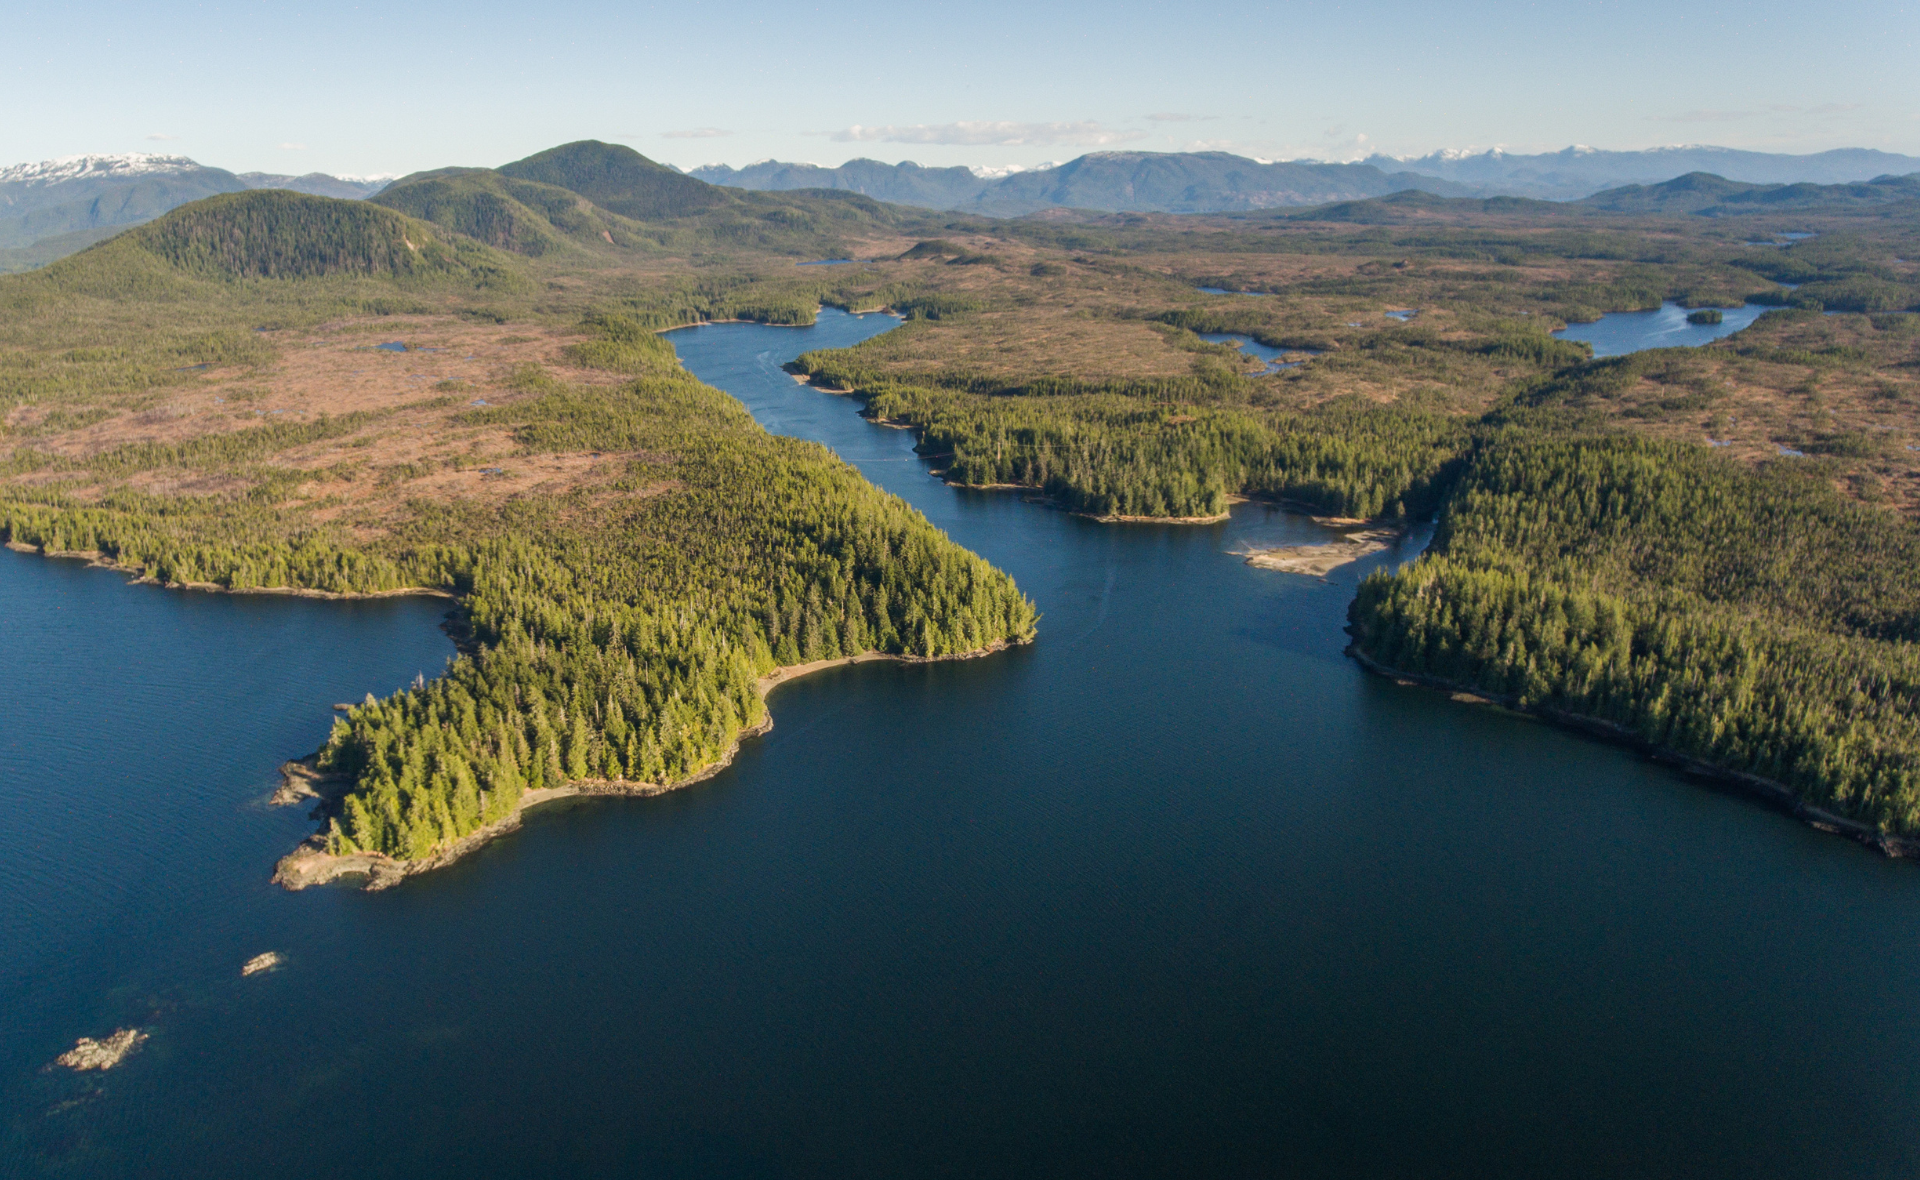 Image of the Heiltsuk Nation. A forested coastline littered with inlets on a beautiful sunny day, with mountains in the background.